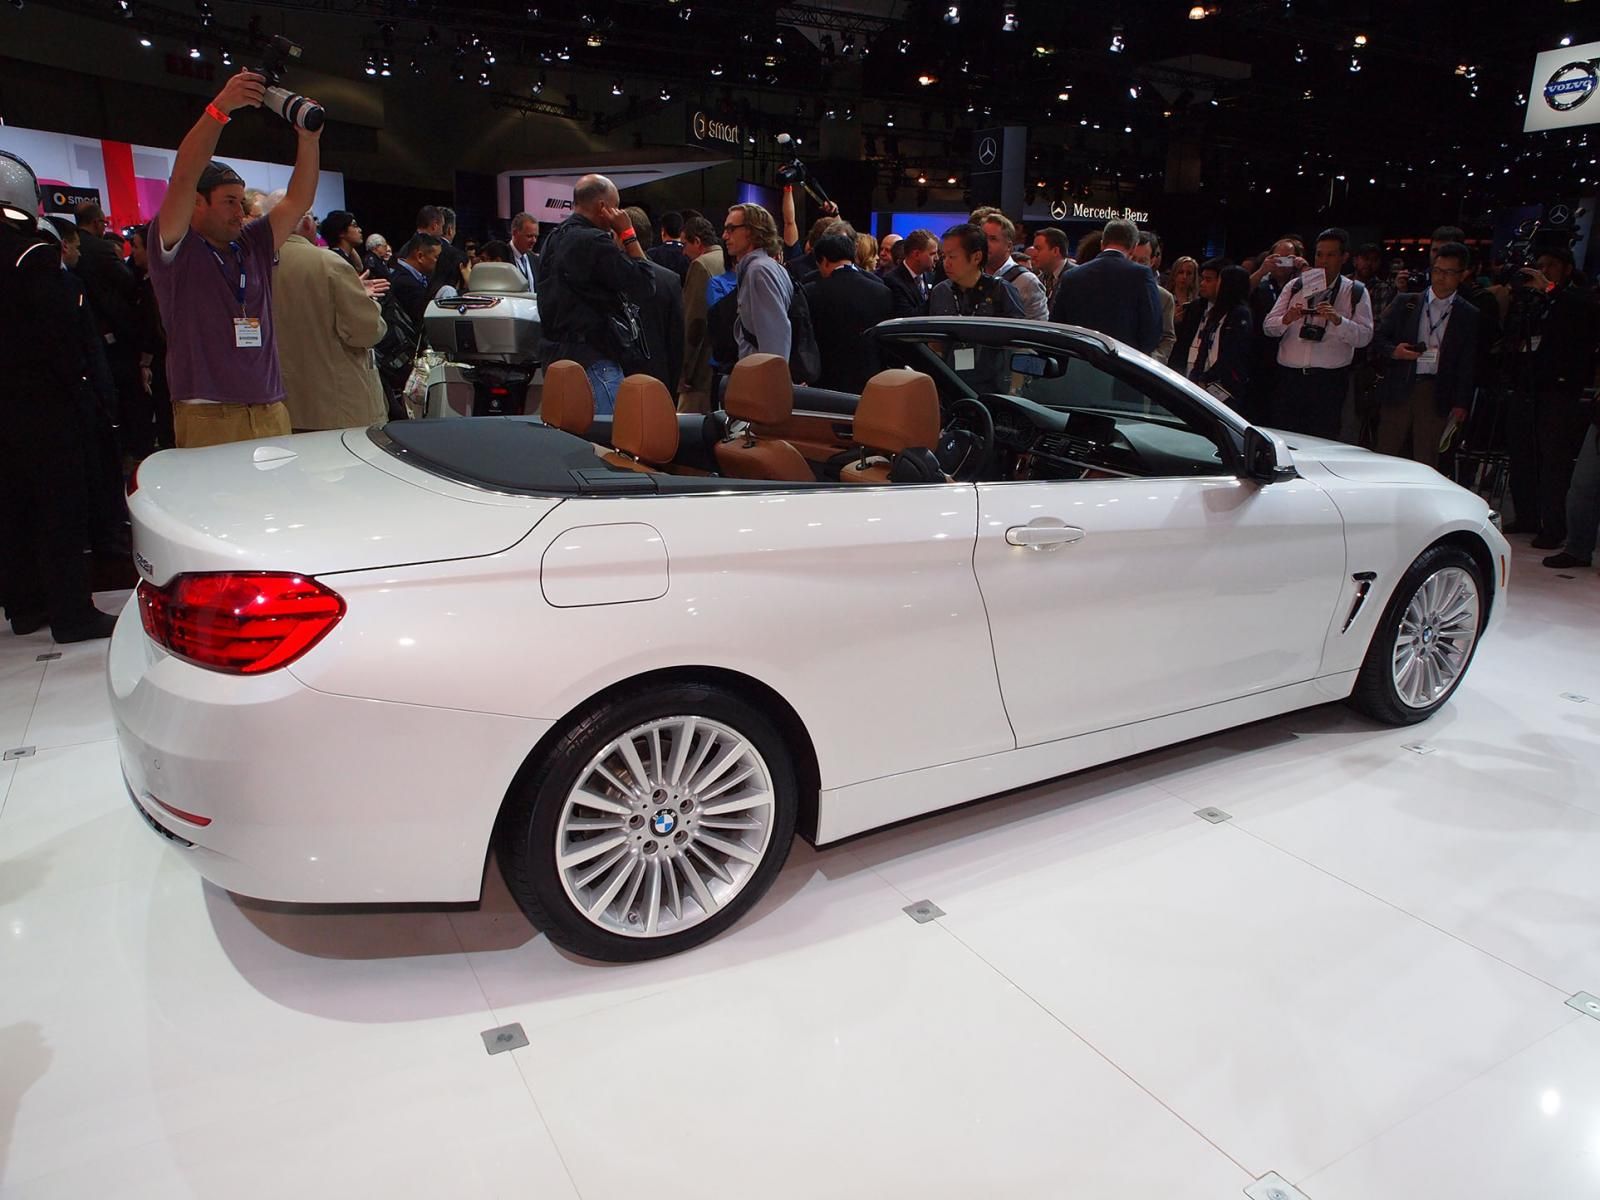 YEN 2014 BMW 4 SERS CONVERTBLE LOS ANGLES RESM GALERS